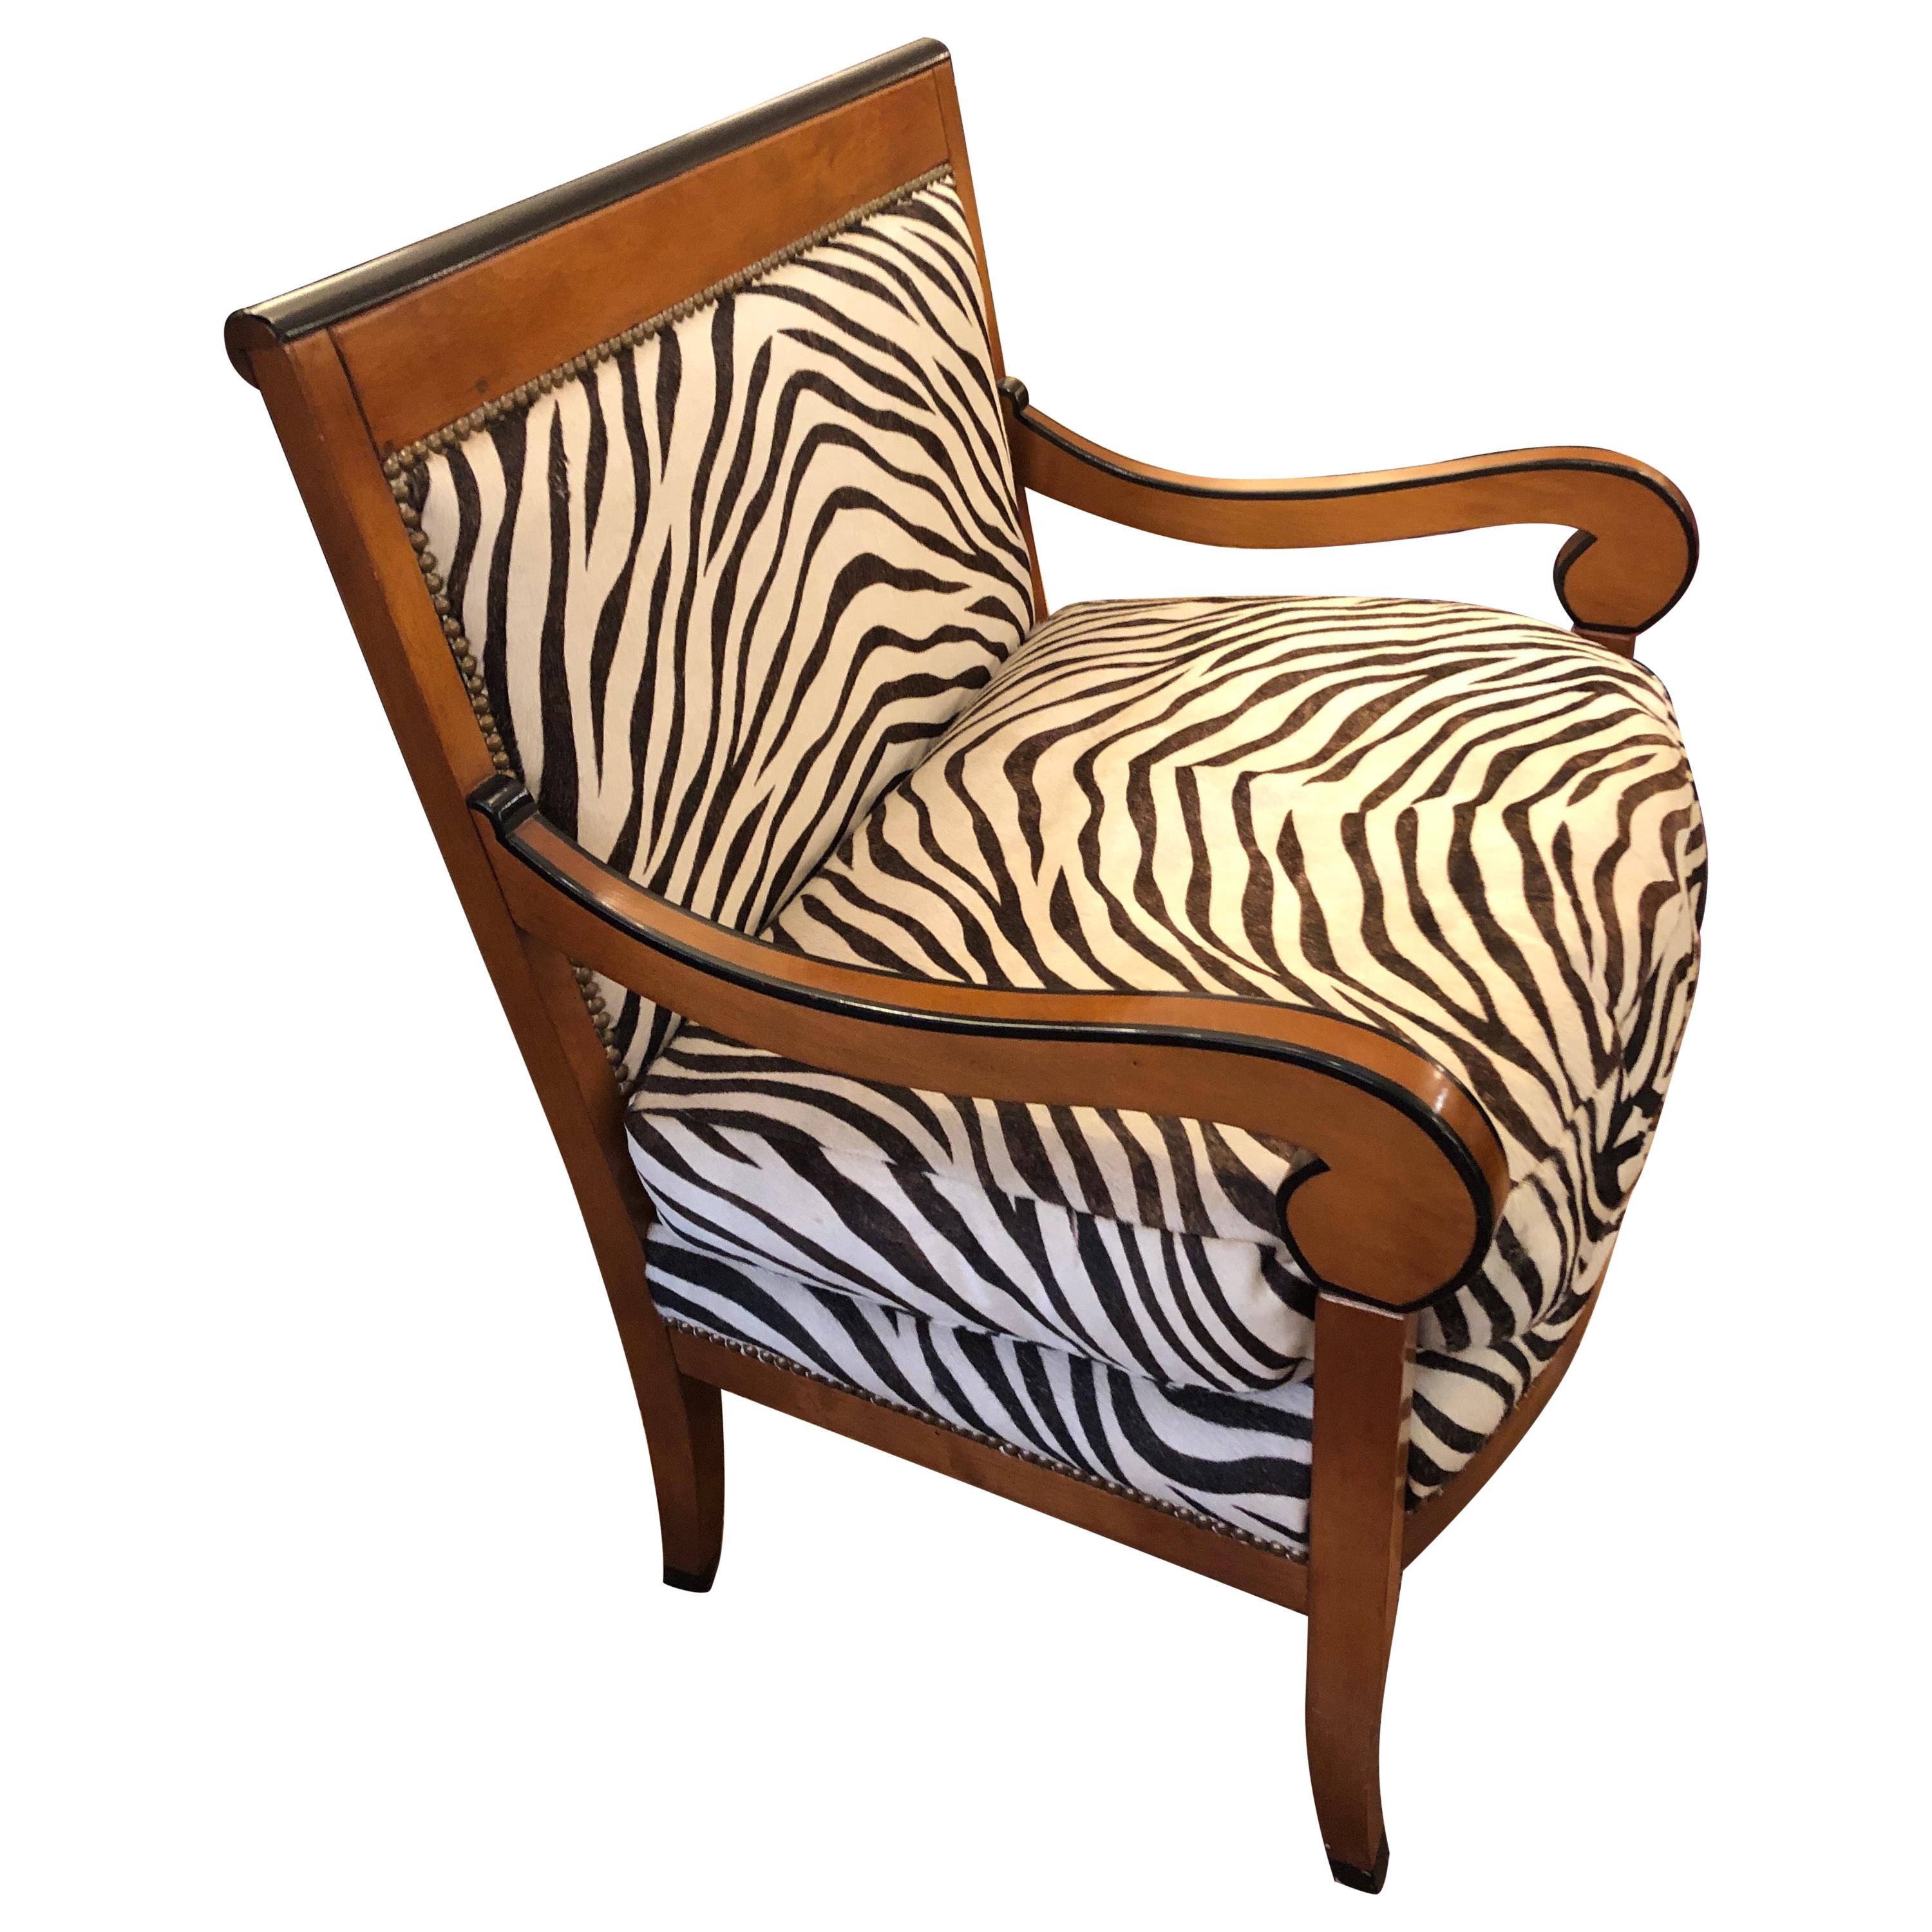 Superbly Stylish Club Chair with Printed Zebra Cowhide Upholstery